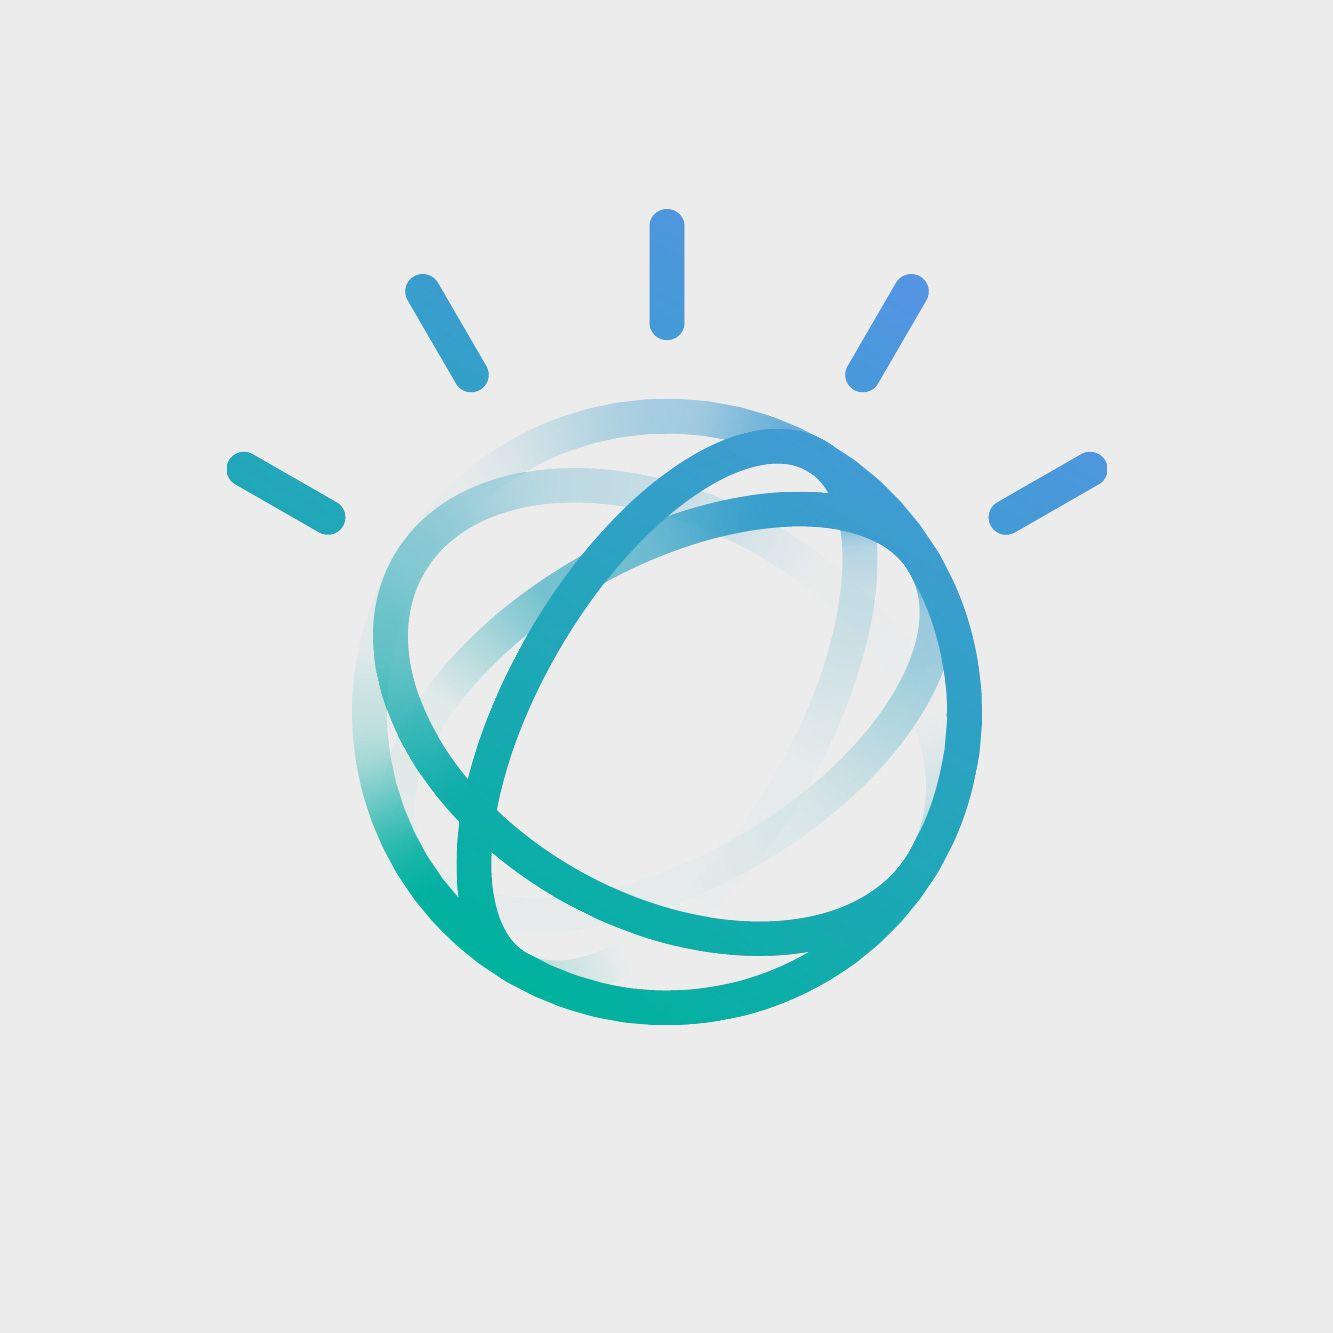 IBM Vector Logo - Brand New: New Logo and Identity for IBM Watson done In-house (with ...